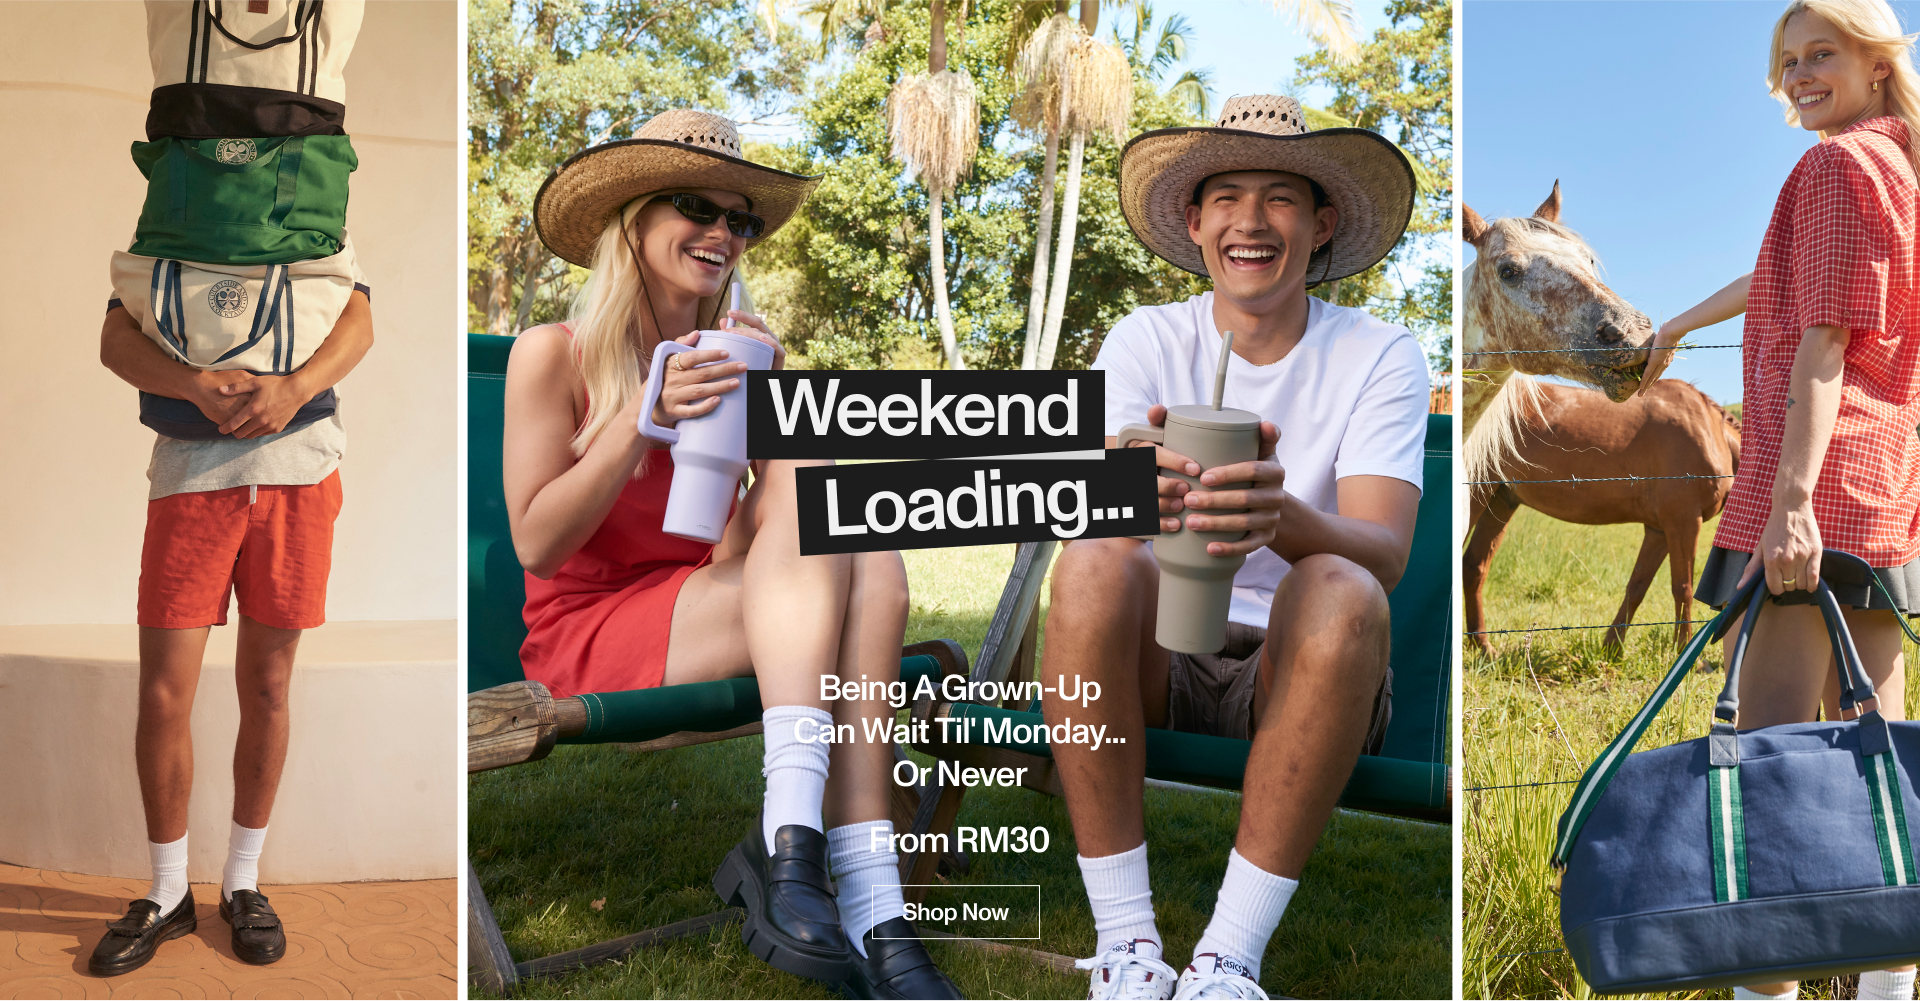 Weekend Loading. Being a Grown-Up Can Wait Til' Monday...Or Never. From $55. Shop Now.